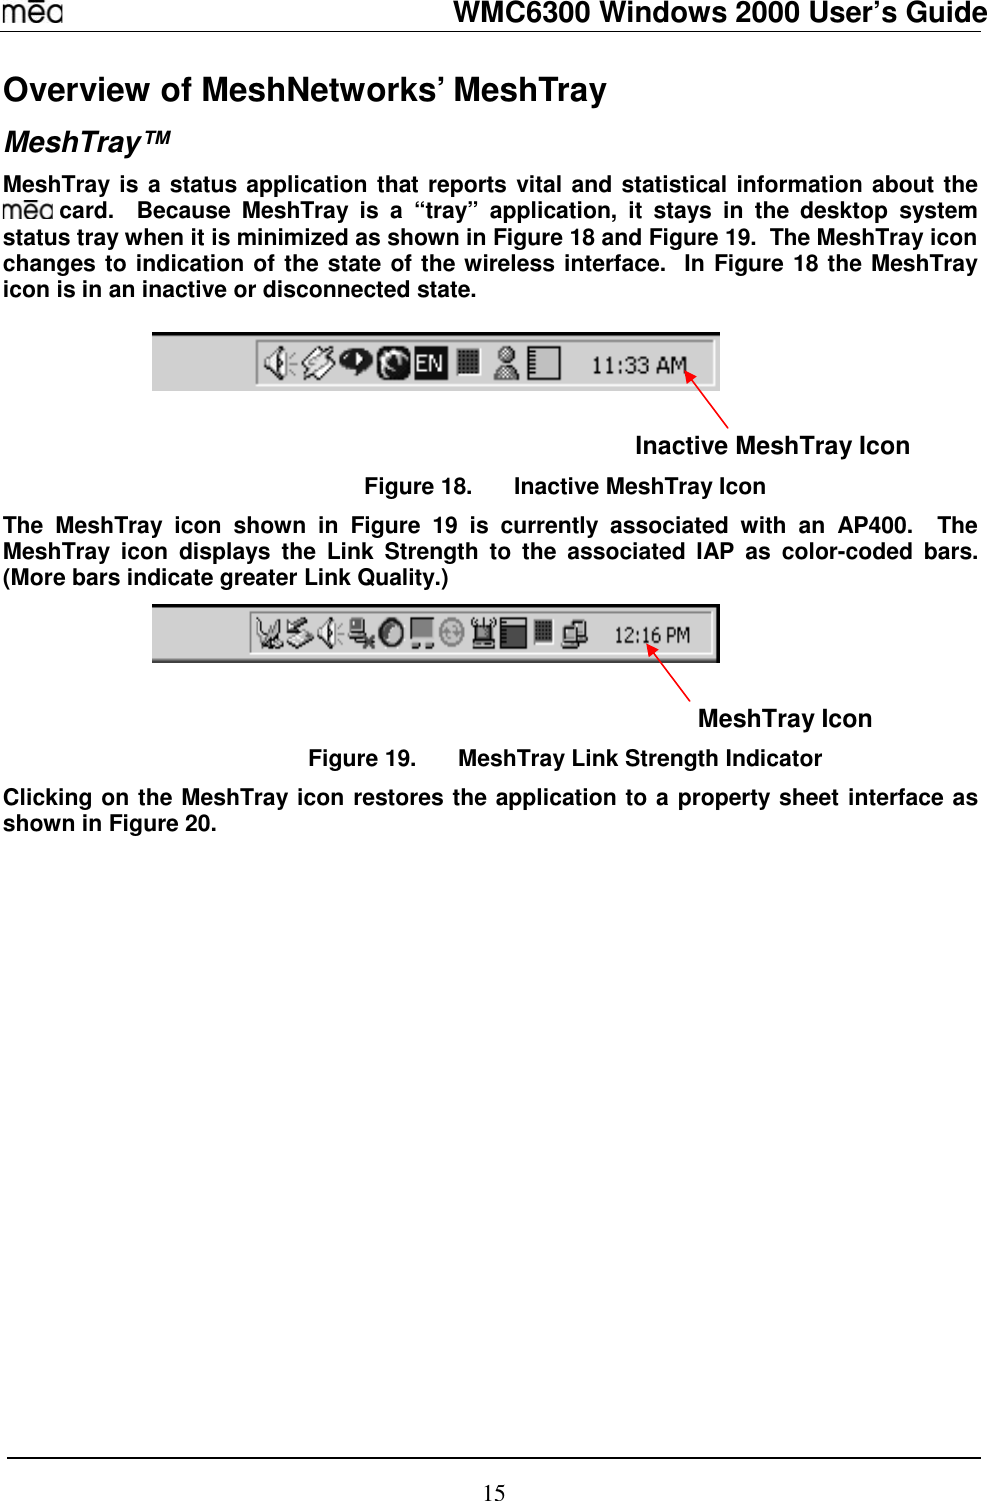   WMC6300 Windows 2000 User’s Guide 15 Overview of MeshNetworks’ MeshTray MeshTray™ MeshTray is a status application that reports vital and statistical information about the  card.  Because MeshTray is a “tray” application, it stays in the desktop system status tray when it is minimized as shown in Figure 18 and Figure 19.  The MeshTray icon changes to indication of the state of the wireless interface.  In Figure 18 the MeshTray icon is in an inactive or disconnected state.                                                                                                       Inactive MeshTray Icon Figure 18.  Inactive MeshTray Icon The MeshTray icon shown in Figure 19 is currently associated with an AP400.  The MeshTray icon displays the Link Strength to the associated IAP as color-coded bars.  (More bars indicate greater Link Quality.)                                                                                                                 MeshTray Icon Figure 19.  MeshTray Link Strength Indicator Clicking on the MeshTray icon restores the application to a property sheet interface as shown in Figure 20.   